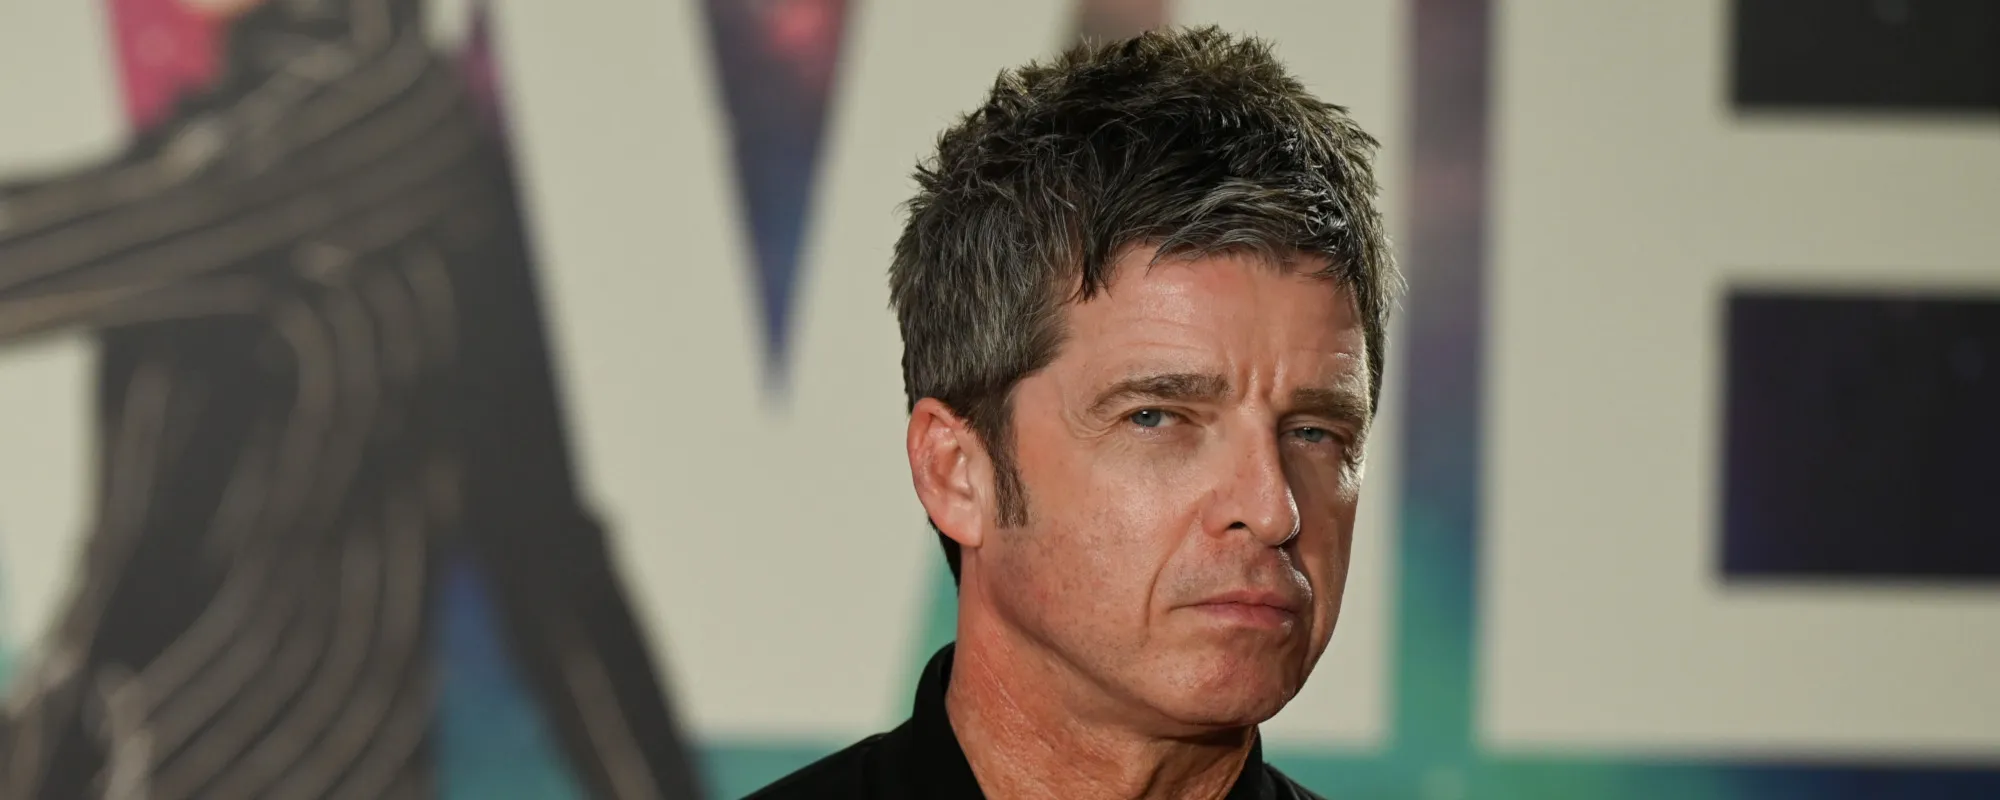 Noel Gallagher is at Peace Ahead of New LP ‘Council Skies’